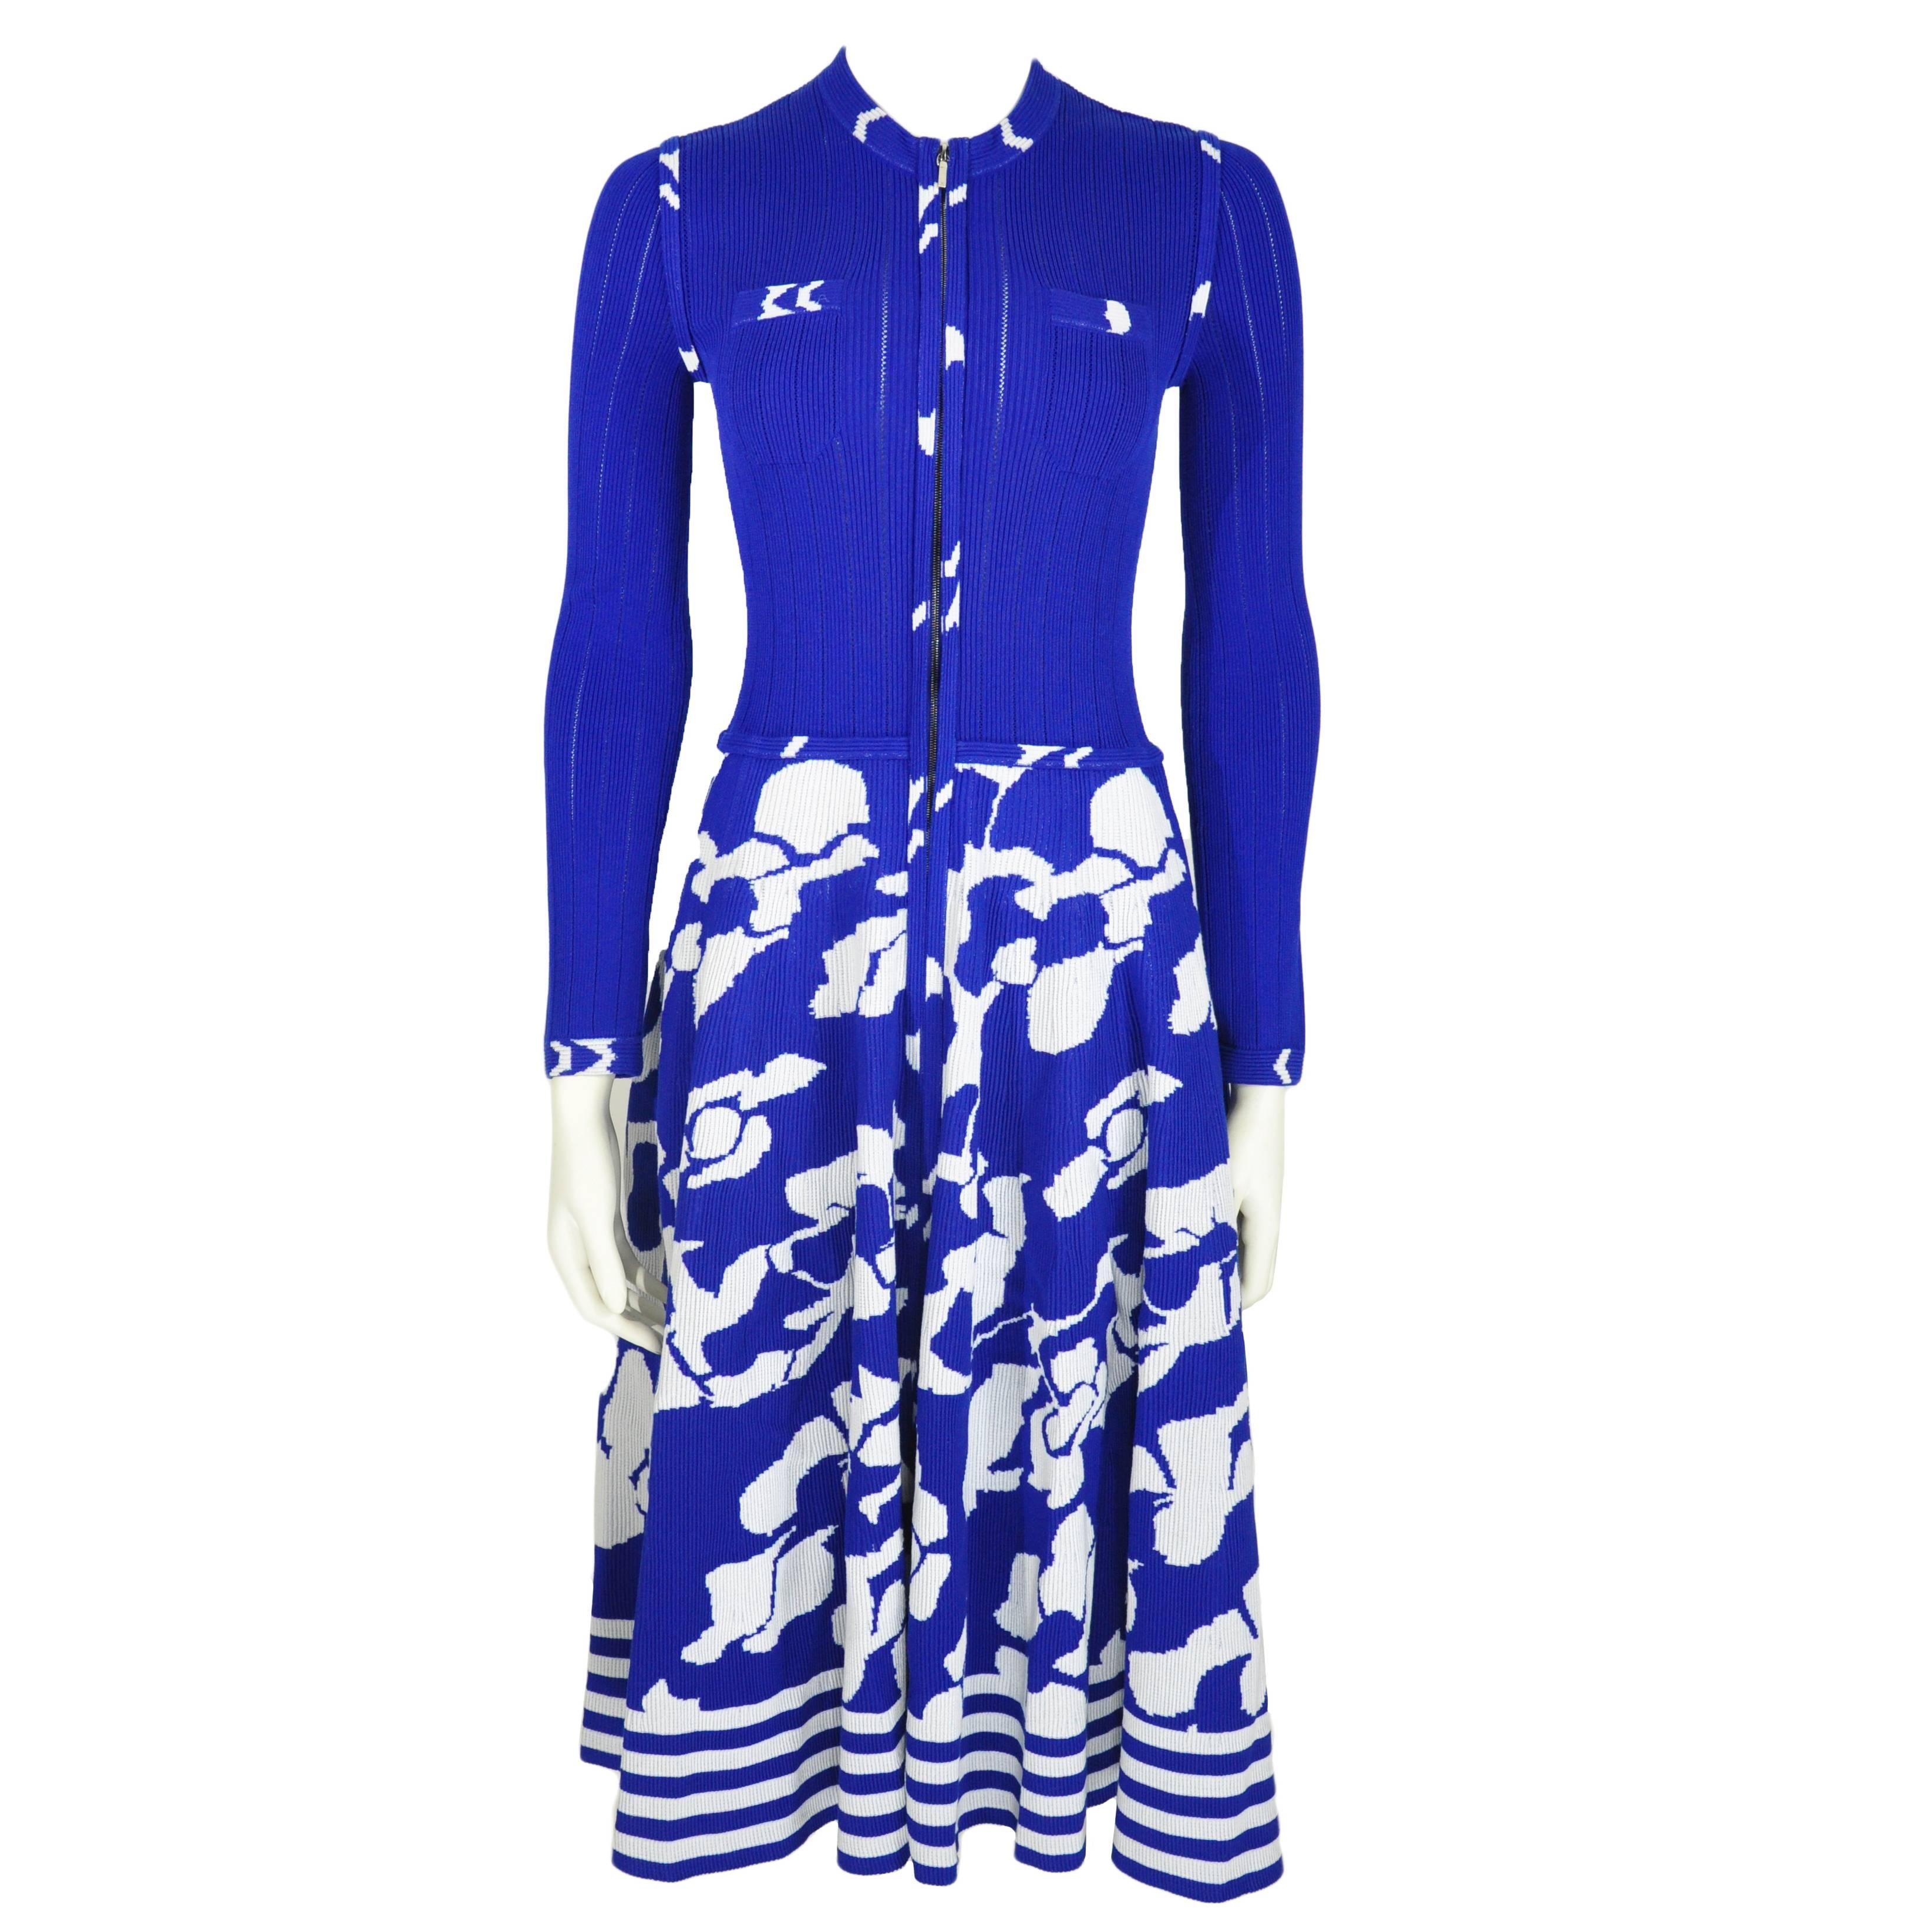 Chanel 2016 Airport Runway Collection Blue & White Print Knit Dress FR38 New For Sale